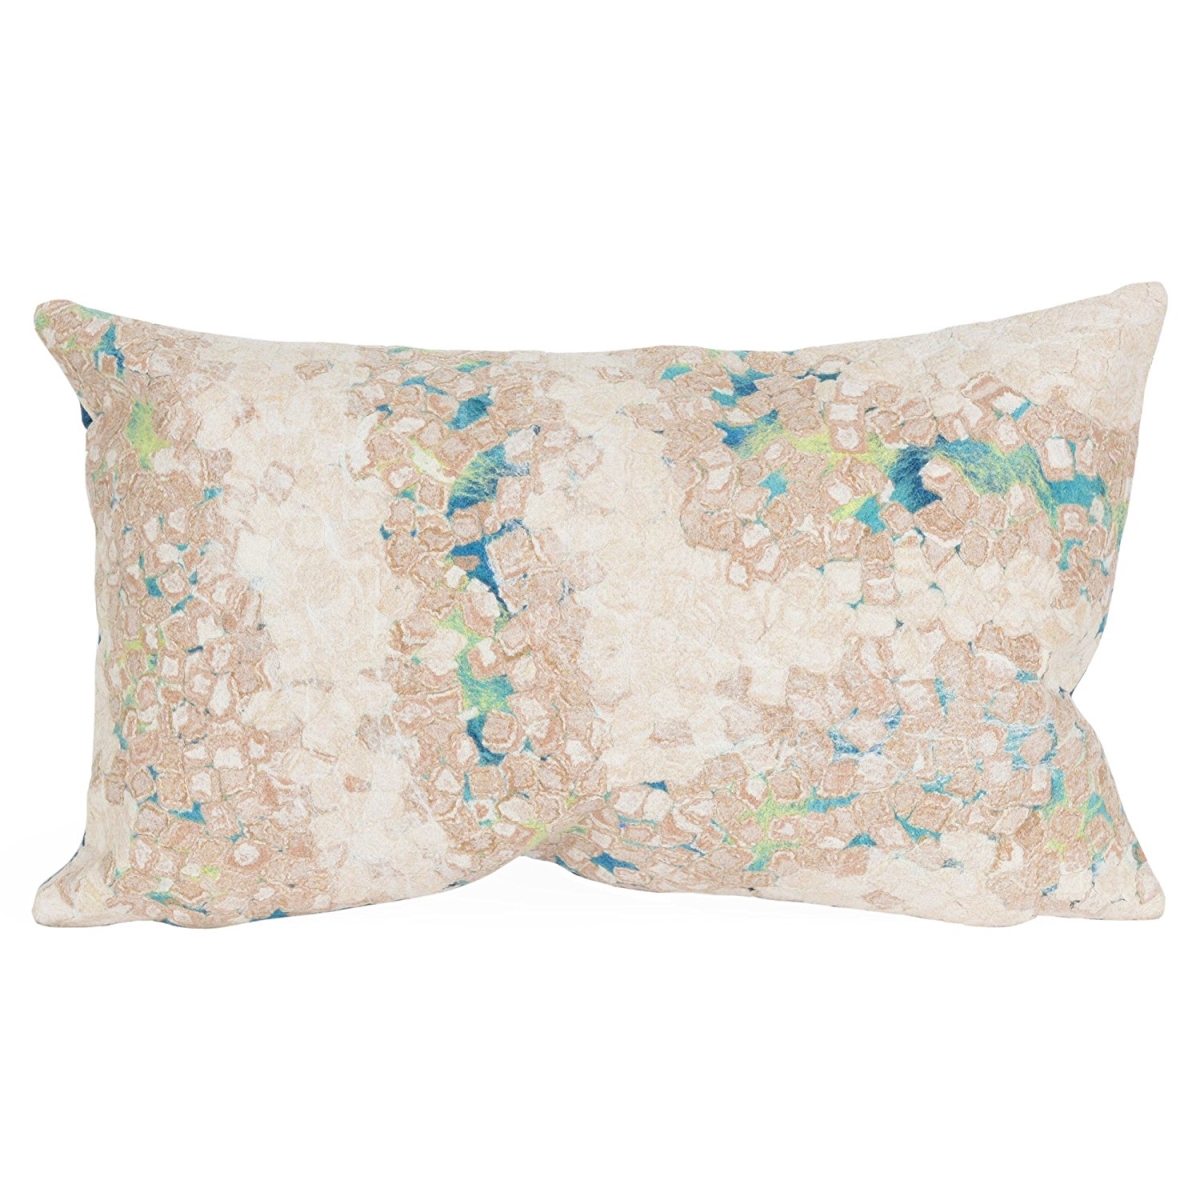 Trans Ocean 7sc1s412603 Visions Iii Hand Made Square Pillows, 4126-03 Elements Cool Blue - 12 X 20 In.